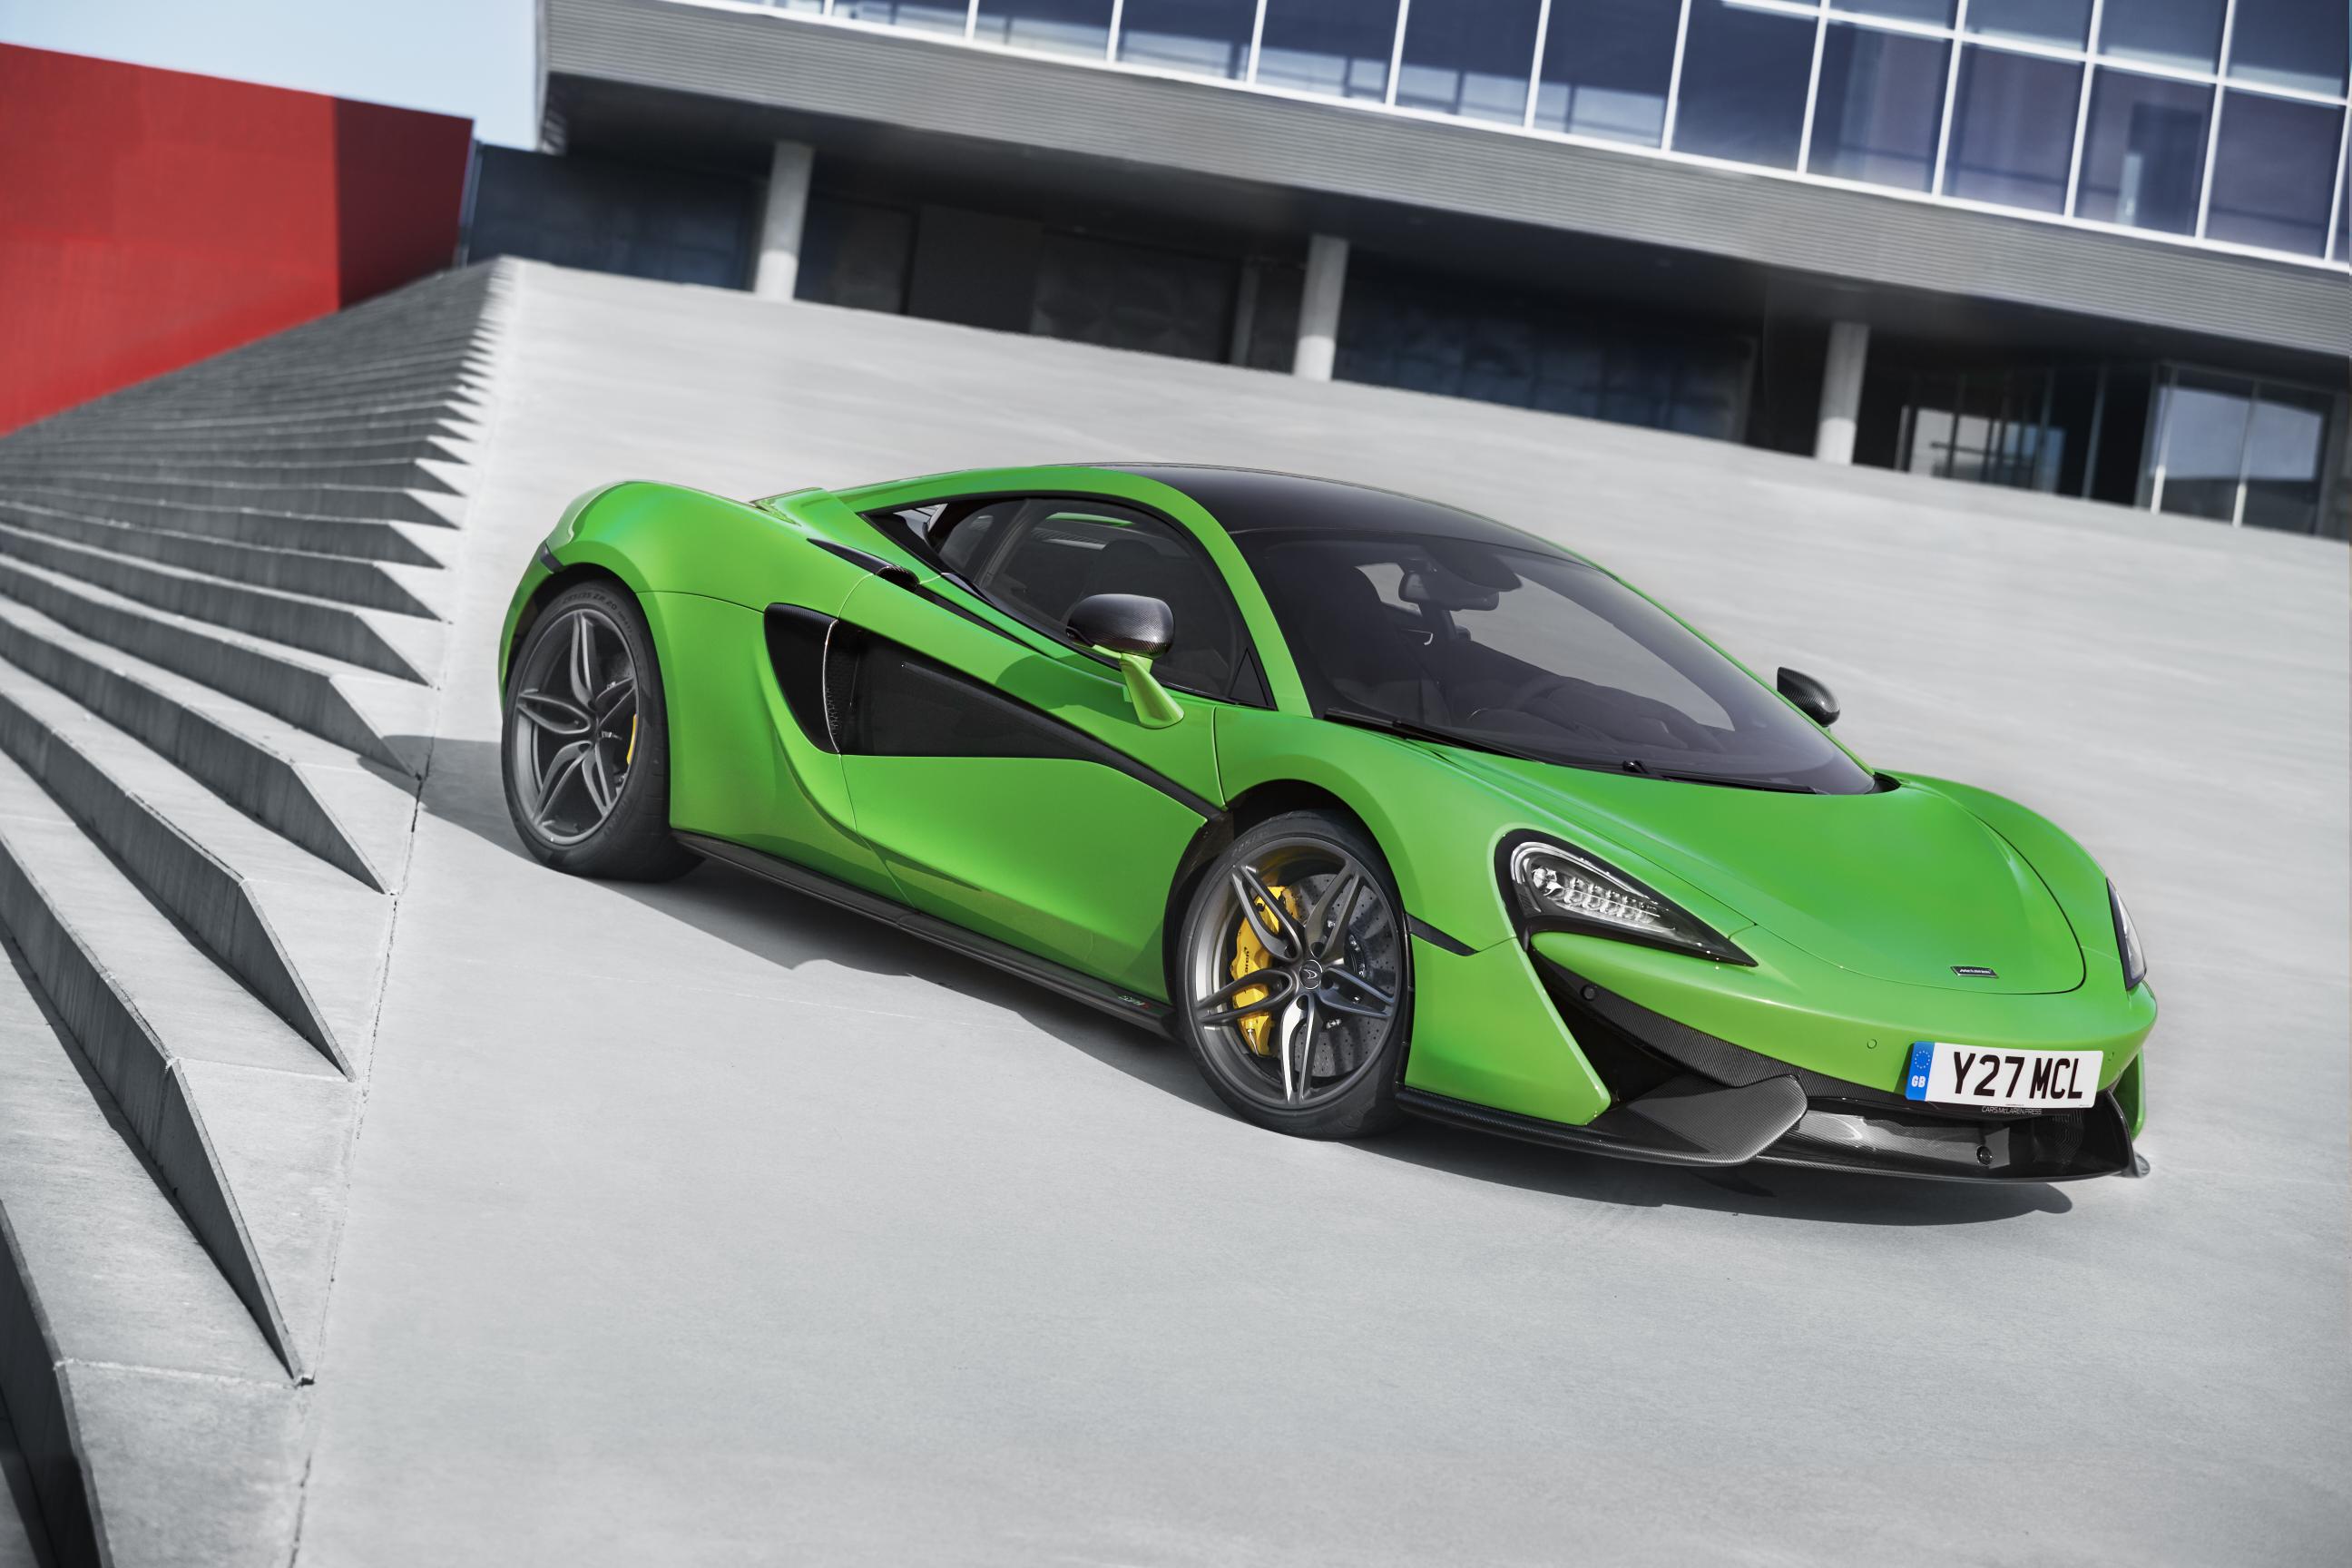 Where does McLaren build its British sports cars?